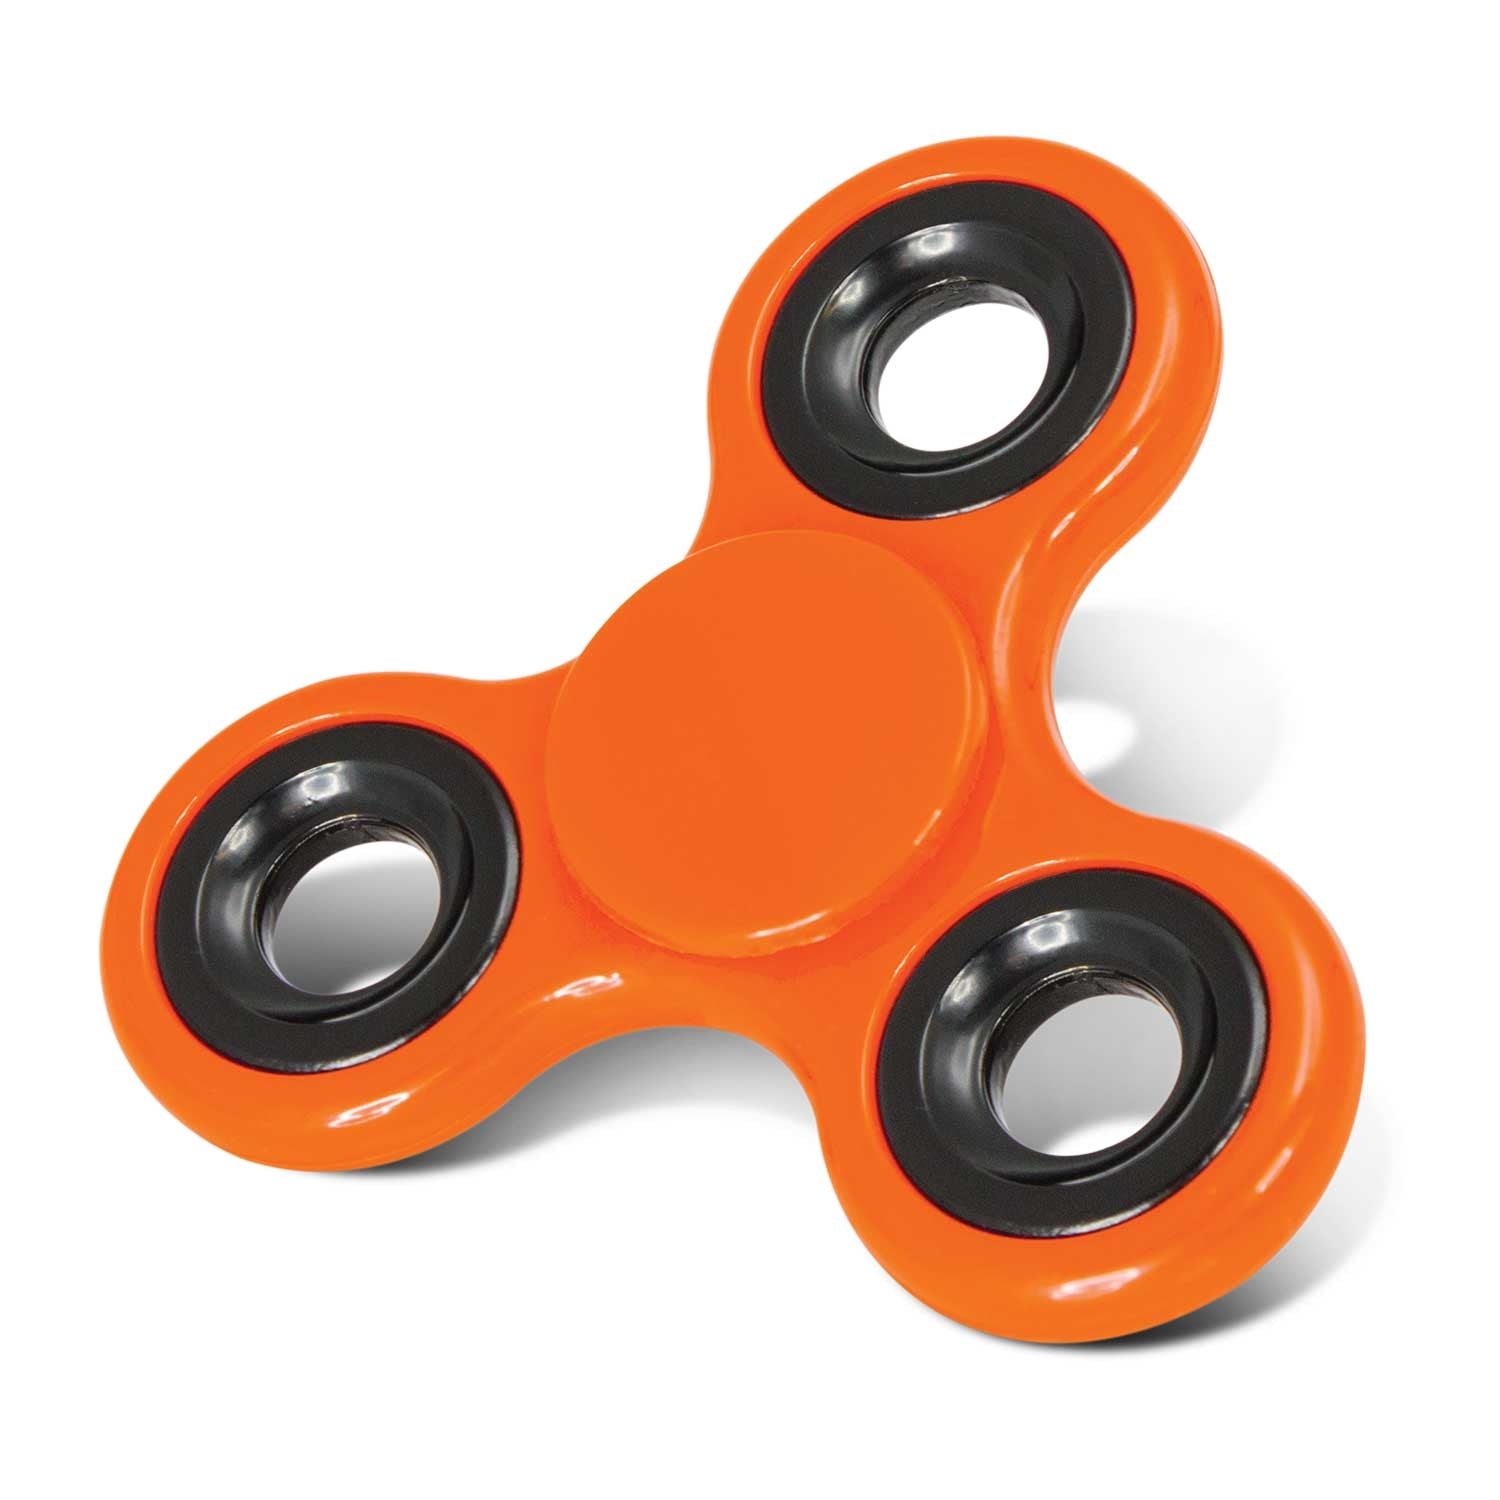 Fidget Spinner with Gift Case  Colour Match [113030]